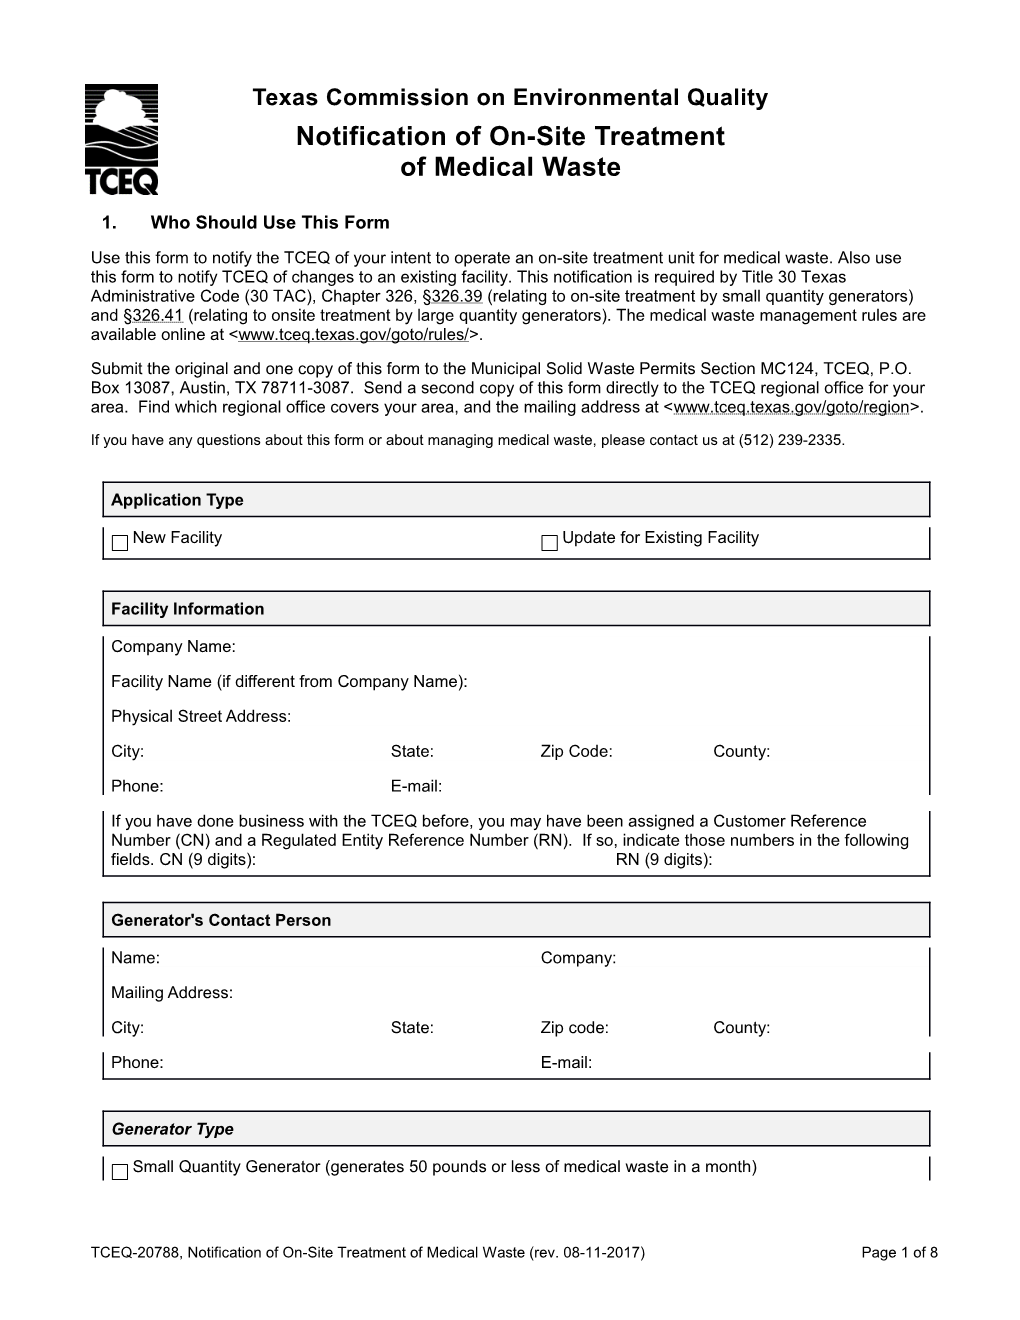 Form TCEQ-20788, Notification of On-Site Treatment of Medical Waste